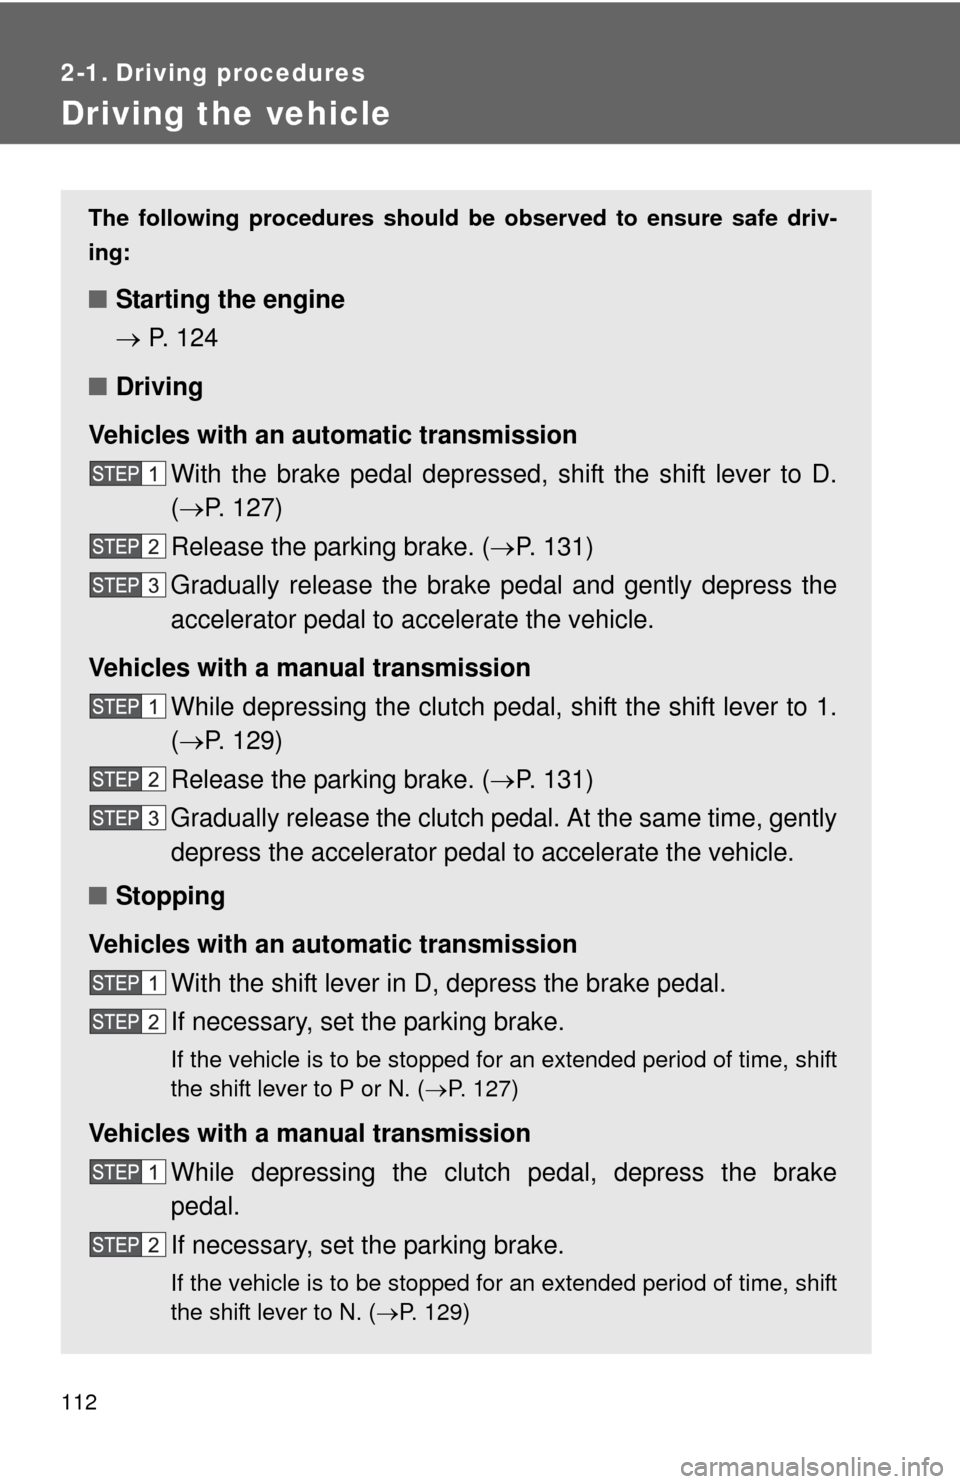 TOYOTA YARIS 2014 3.G Owners Manual 112
2-1. Driving procedures
Driving the vehicle
The following procedures should be observed to ensure safe driv-
ing:
■ Starting the engine
 P.  1 2 4
■ Driving
Vehicles with an au tomatic tran